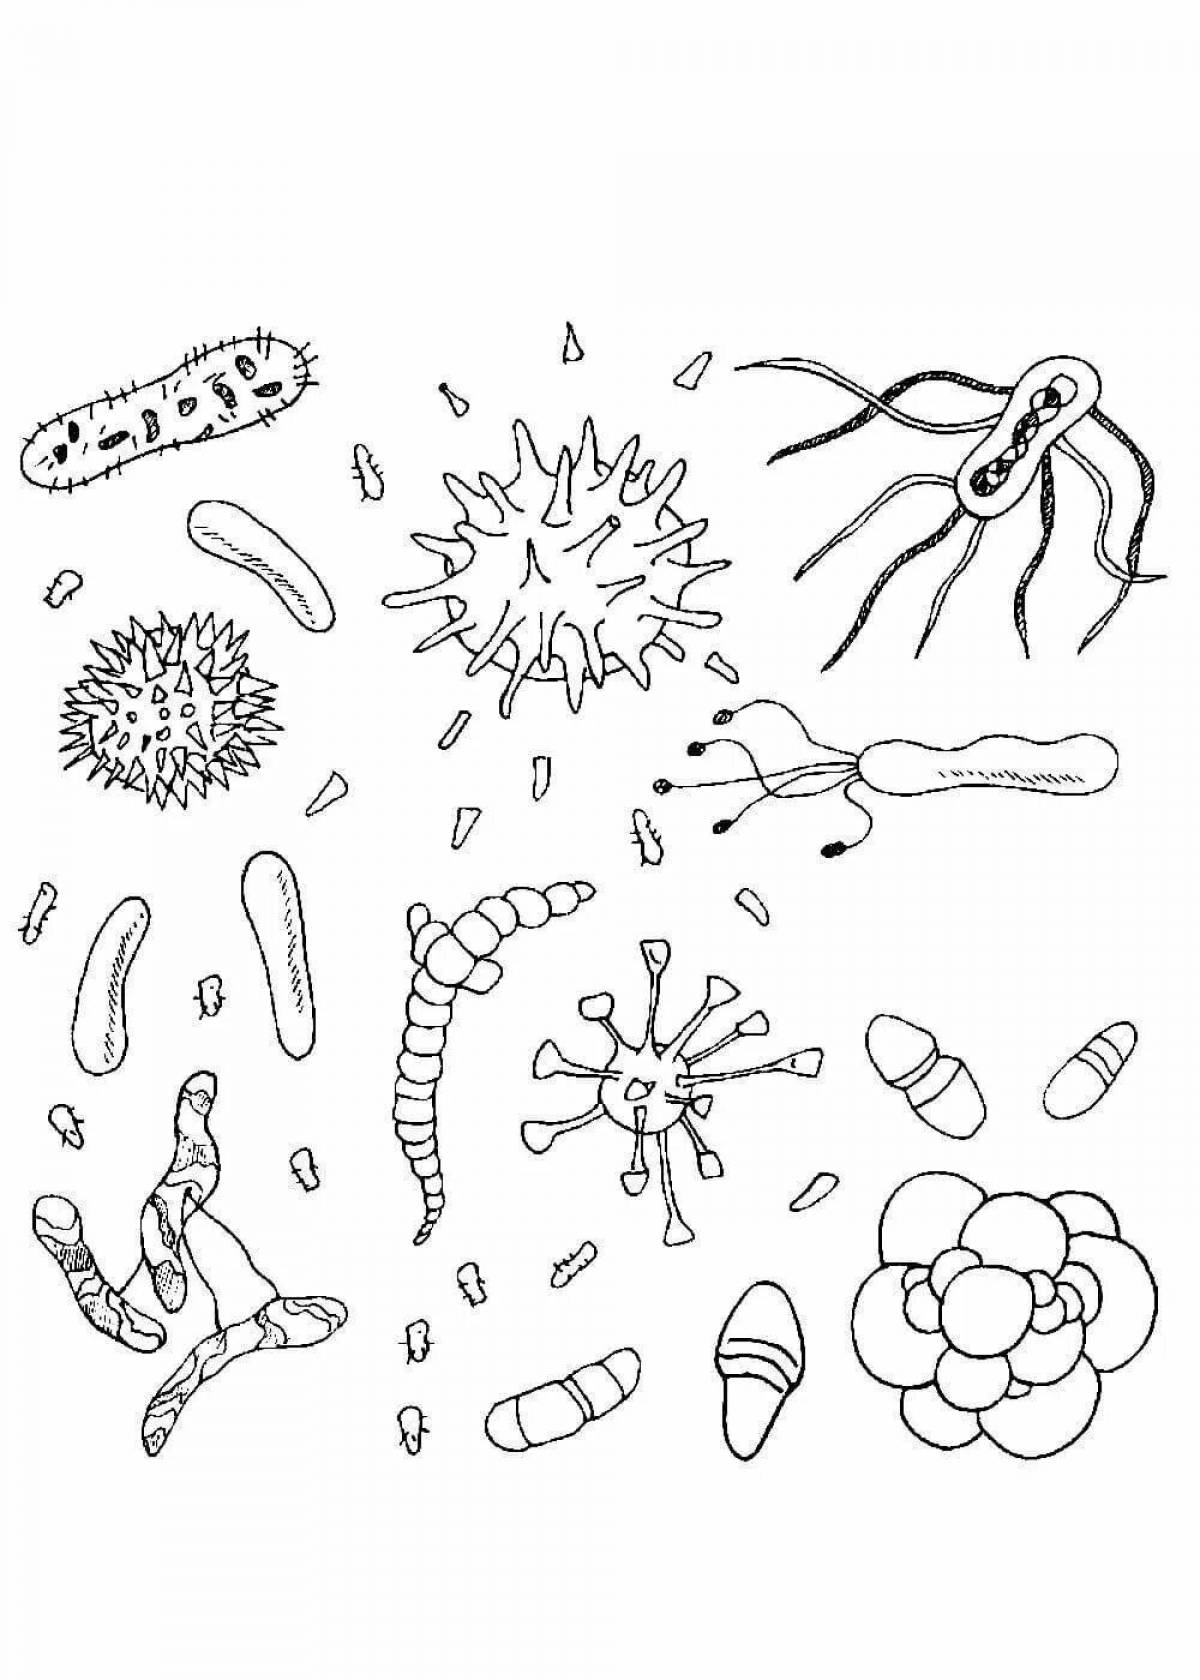 Colorful and intriguing viruses and microbes coloring book